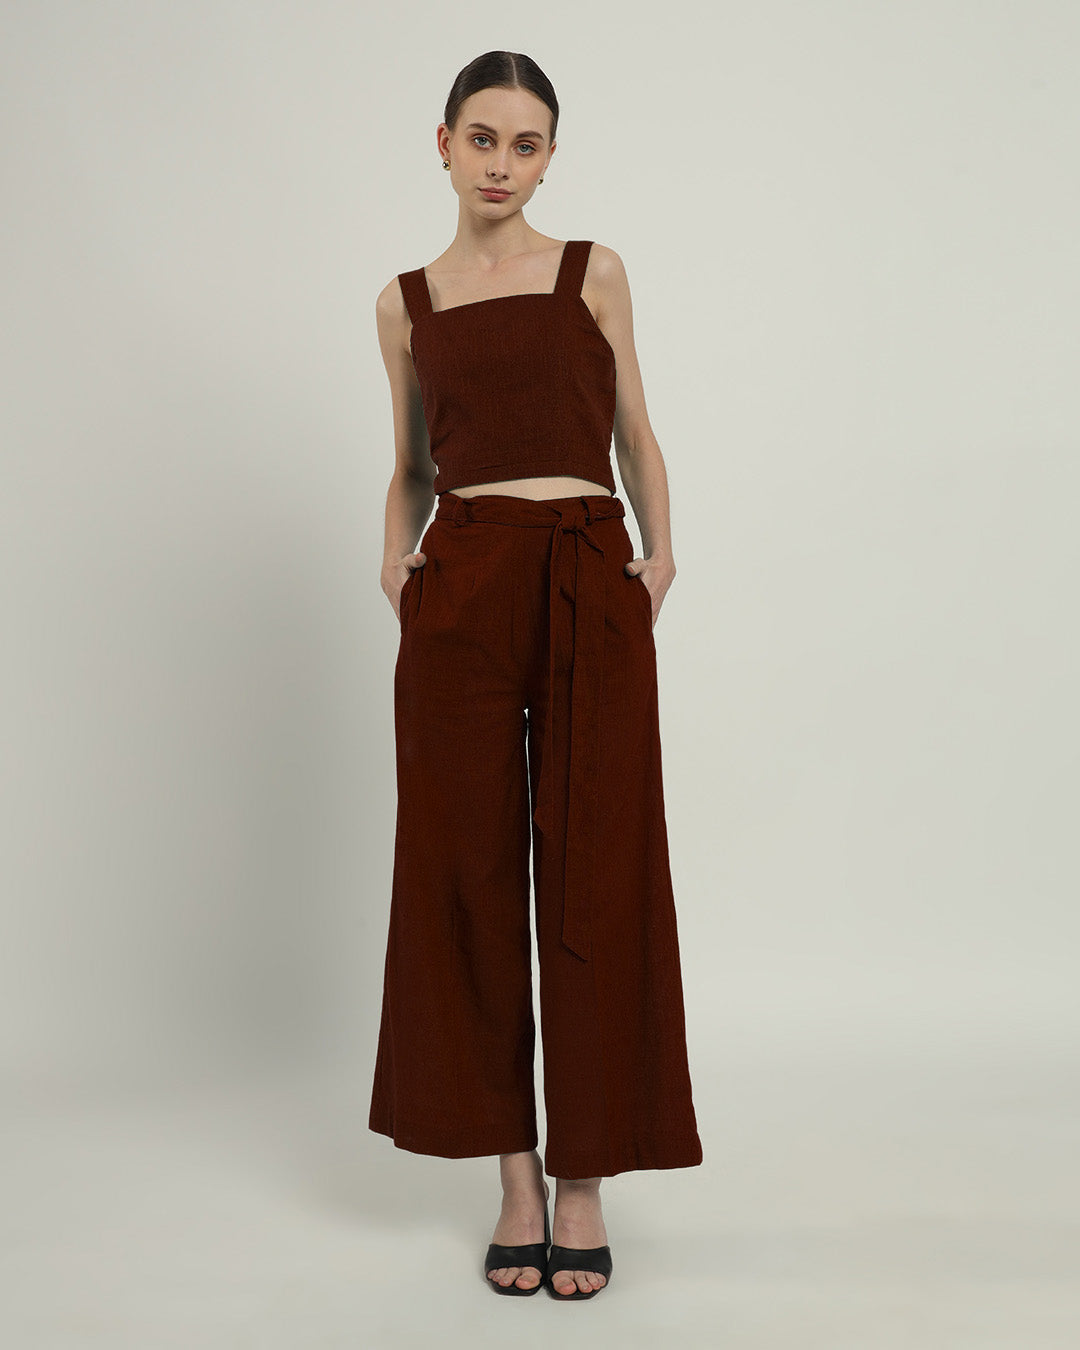 Sleek Square Crop Solid Rouge Top (Without Bottoms)